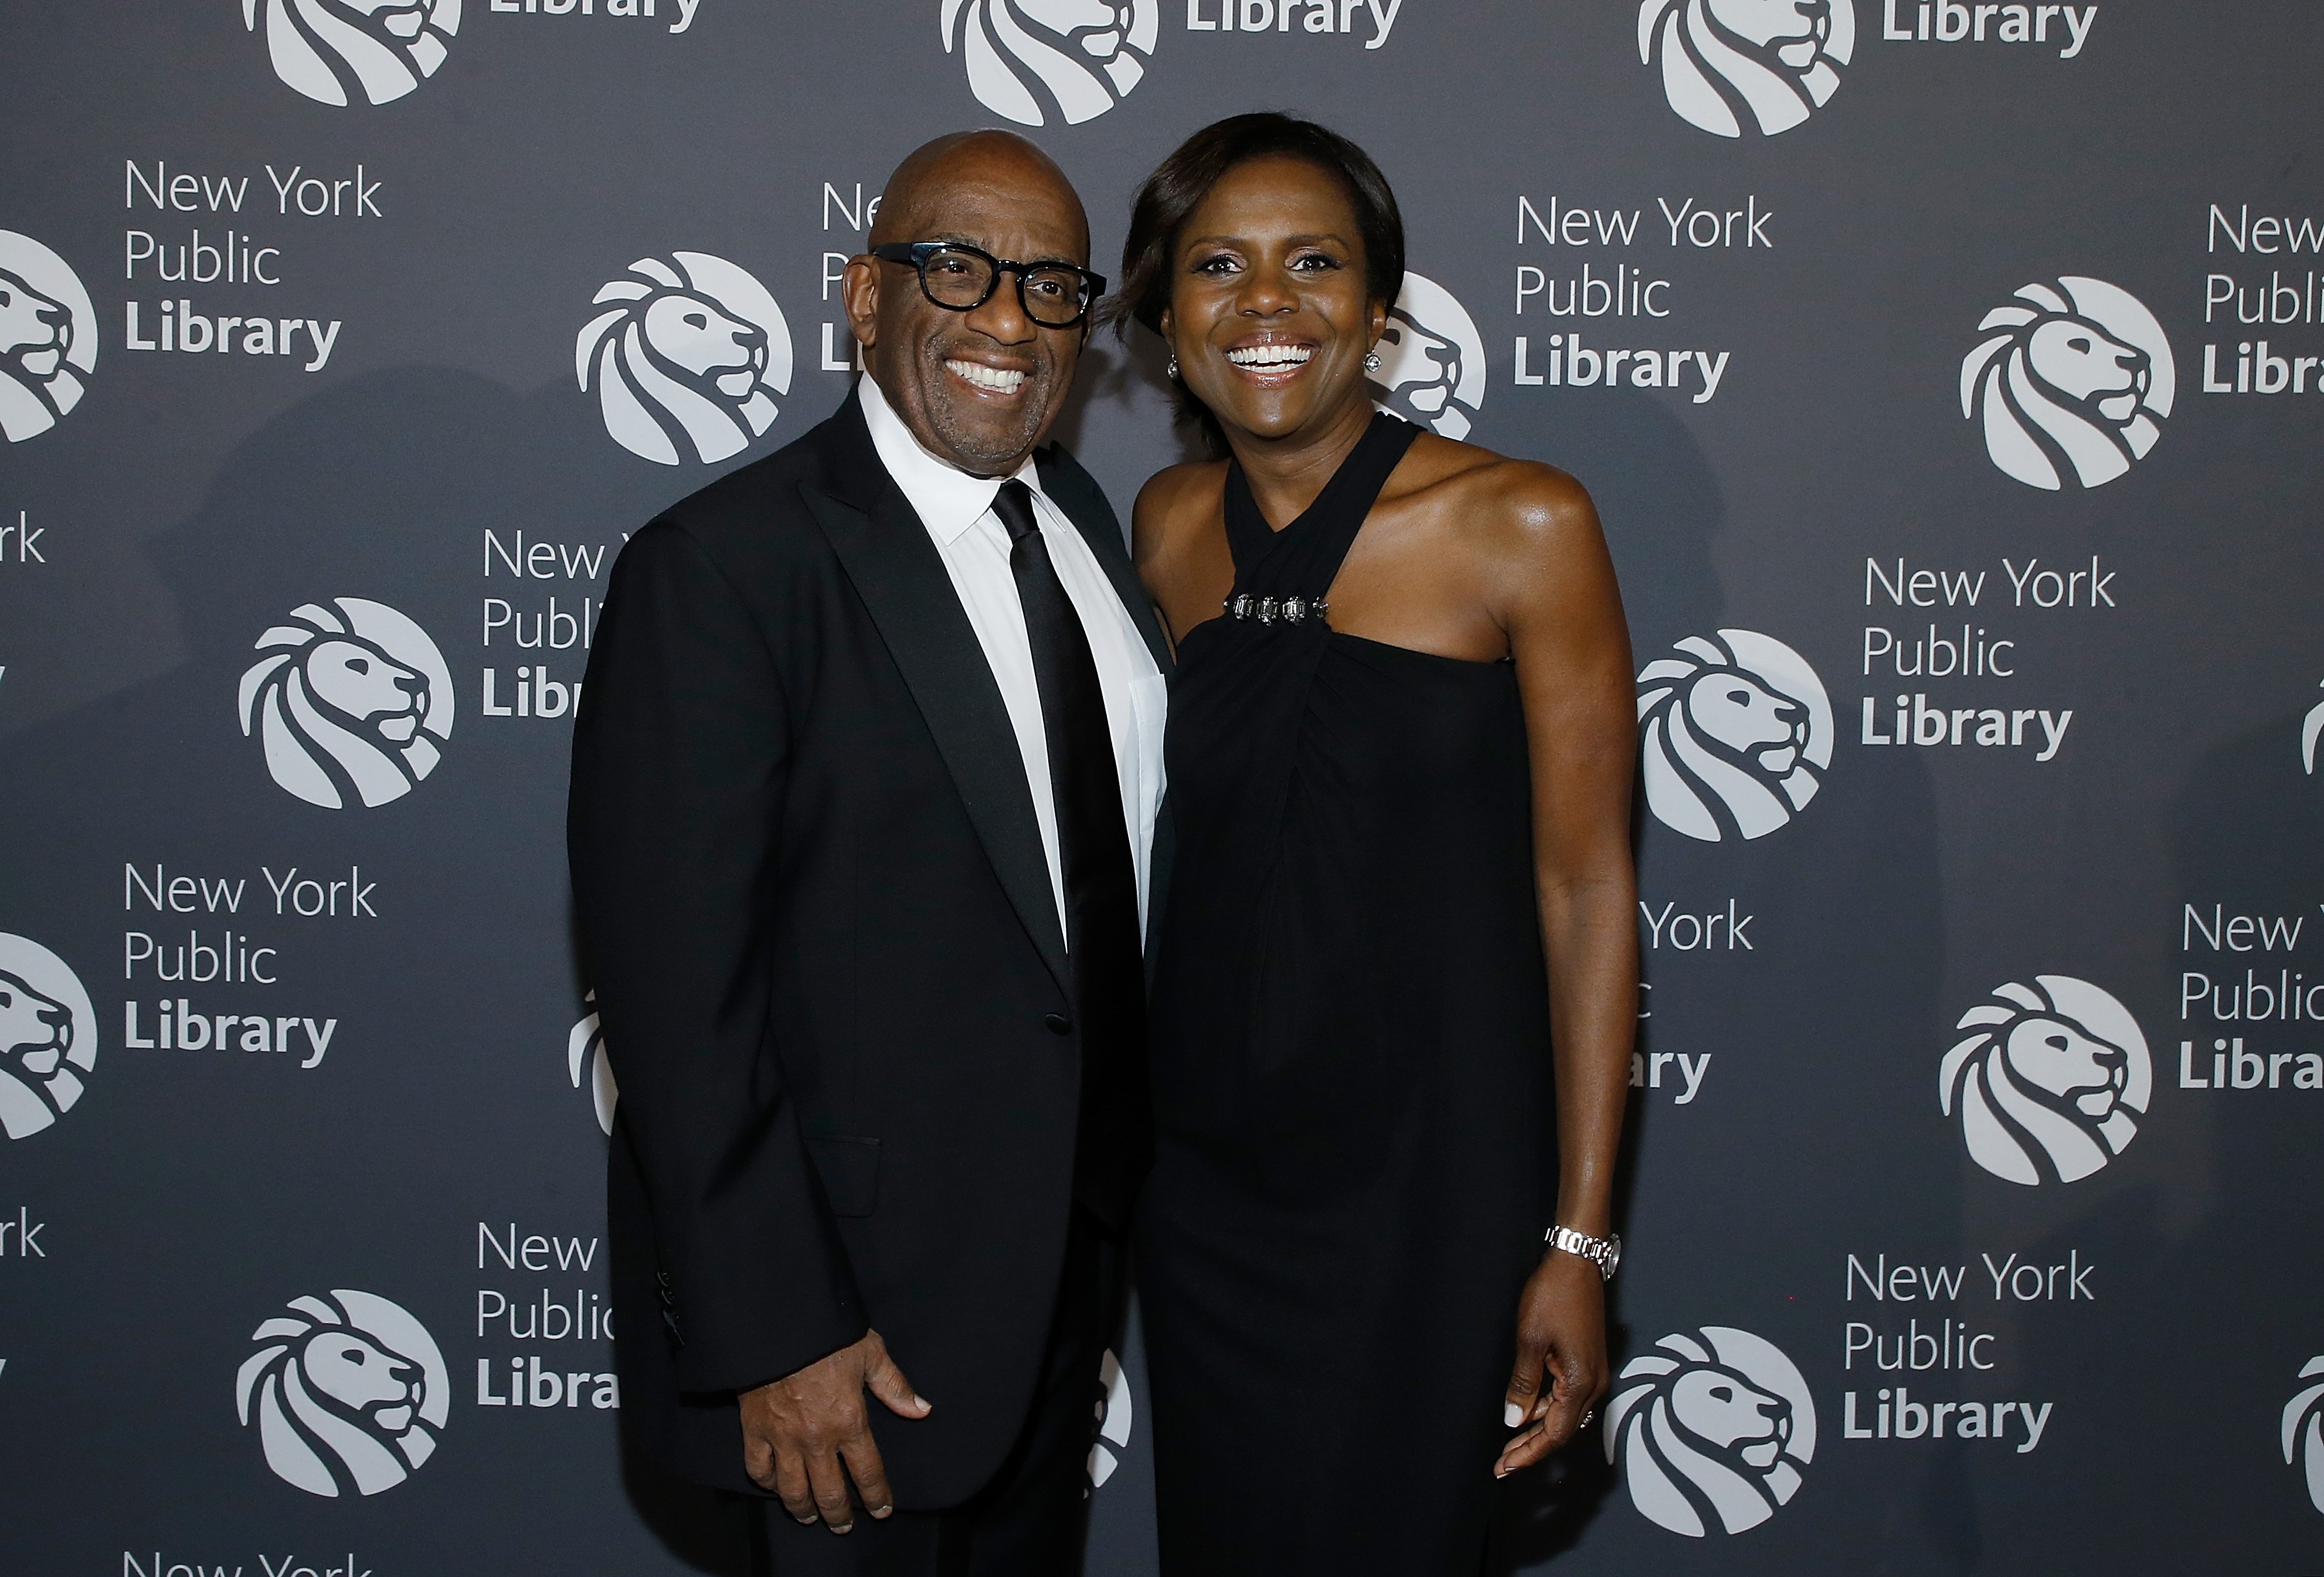 Al Roker and Deborah Roberts attends the New York Public Library 2017 Library Lions Gala at the New York Public Library at the Stephen A. Schwarzman Building on November 6, 2017, in New York City. | Source: Getty Images.